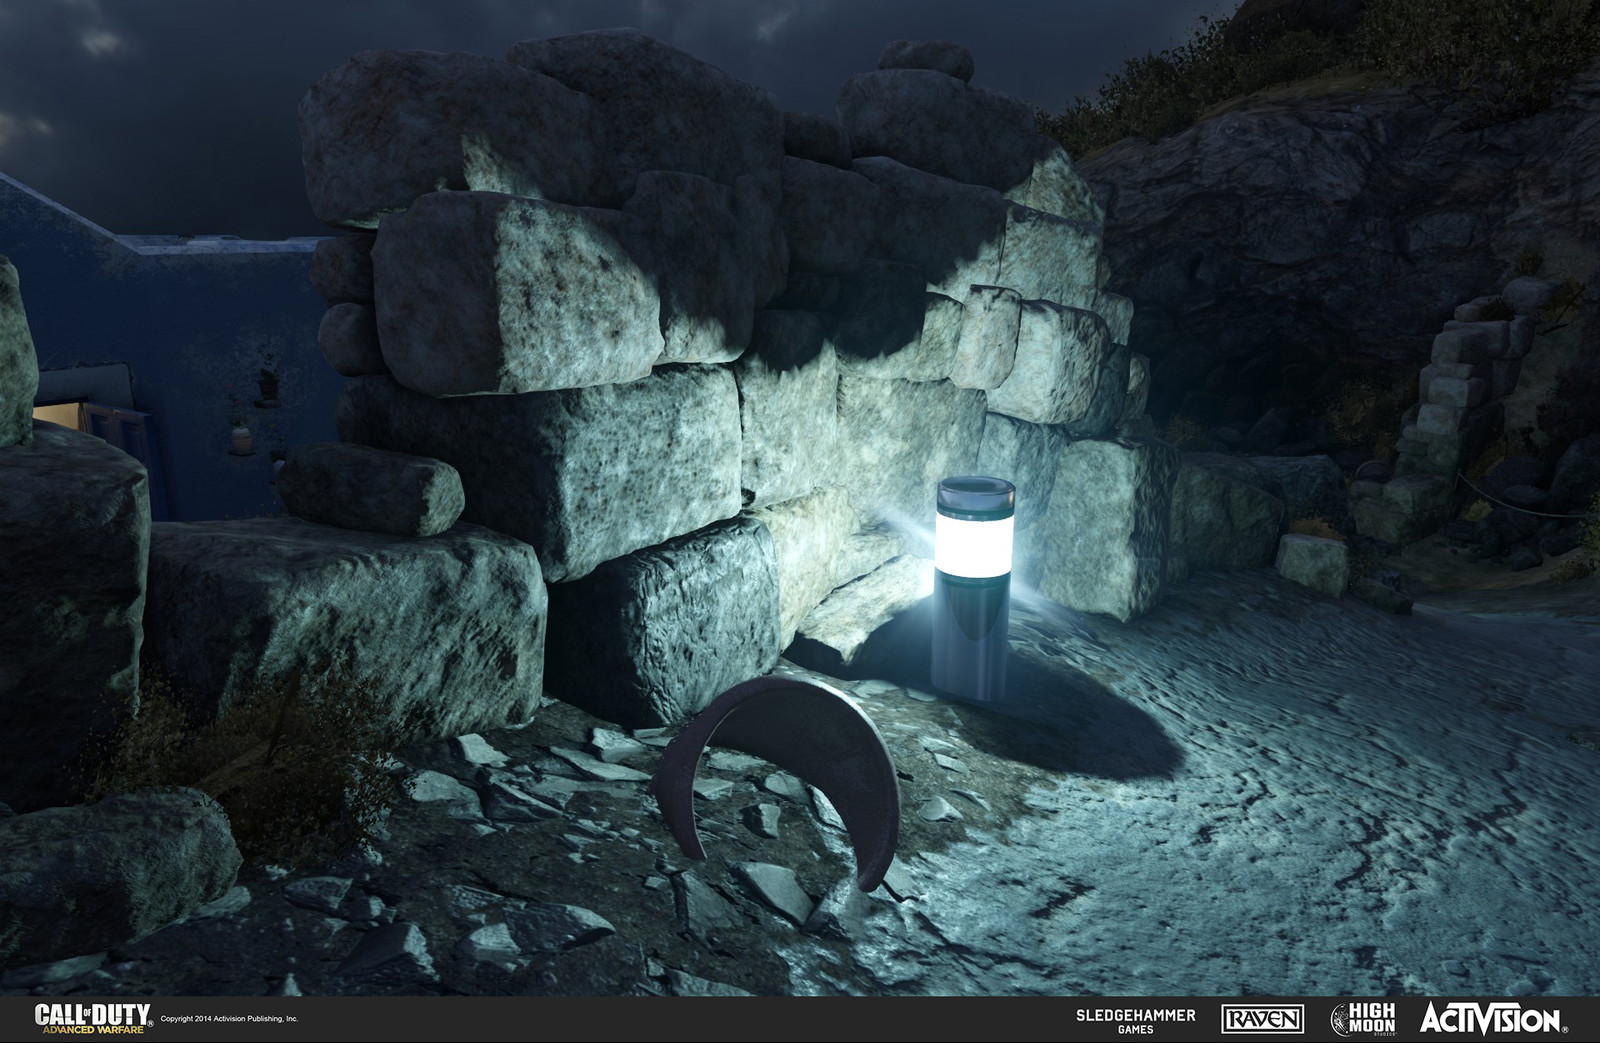 Created rock models and light canister in Terrace. The rocks were done in Z-Brush and the light canister in 3DSMax.